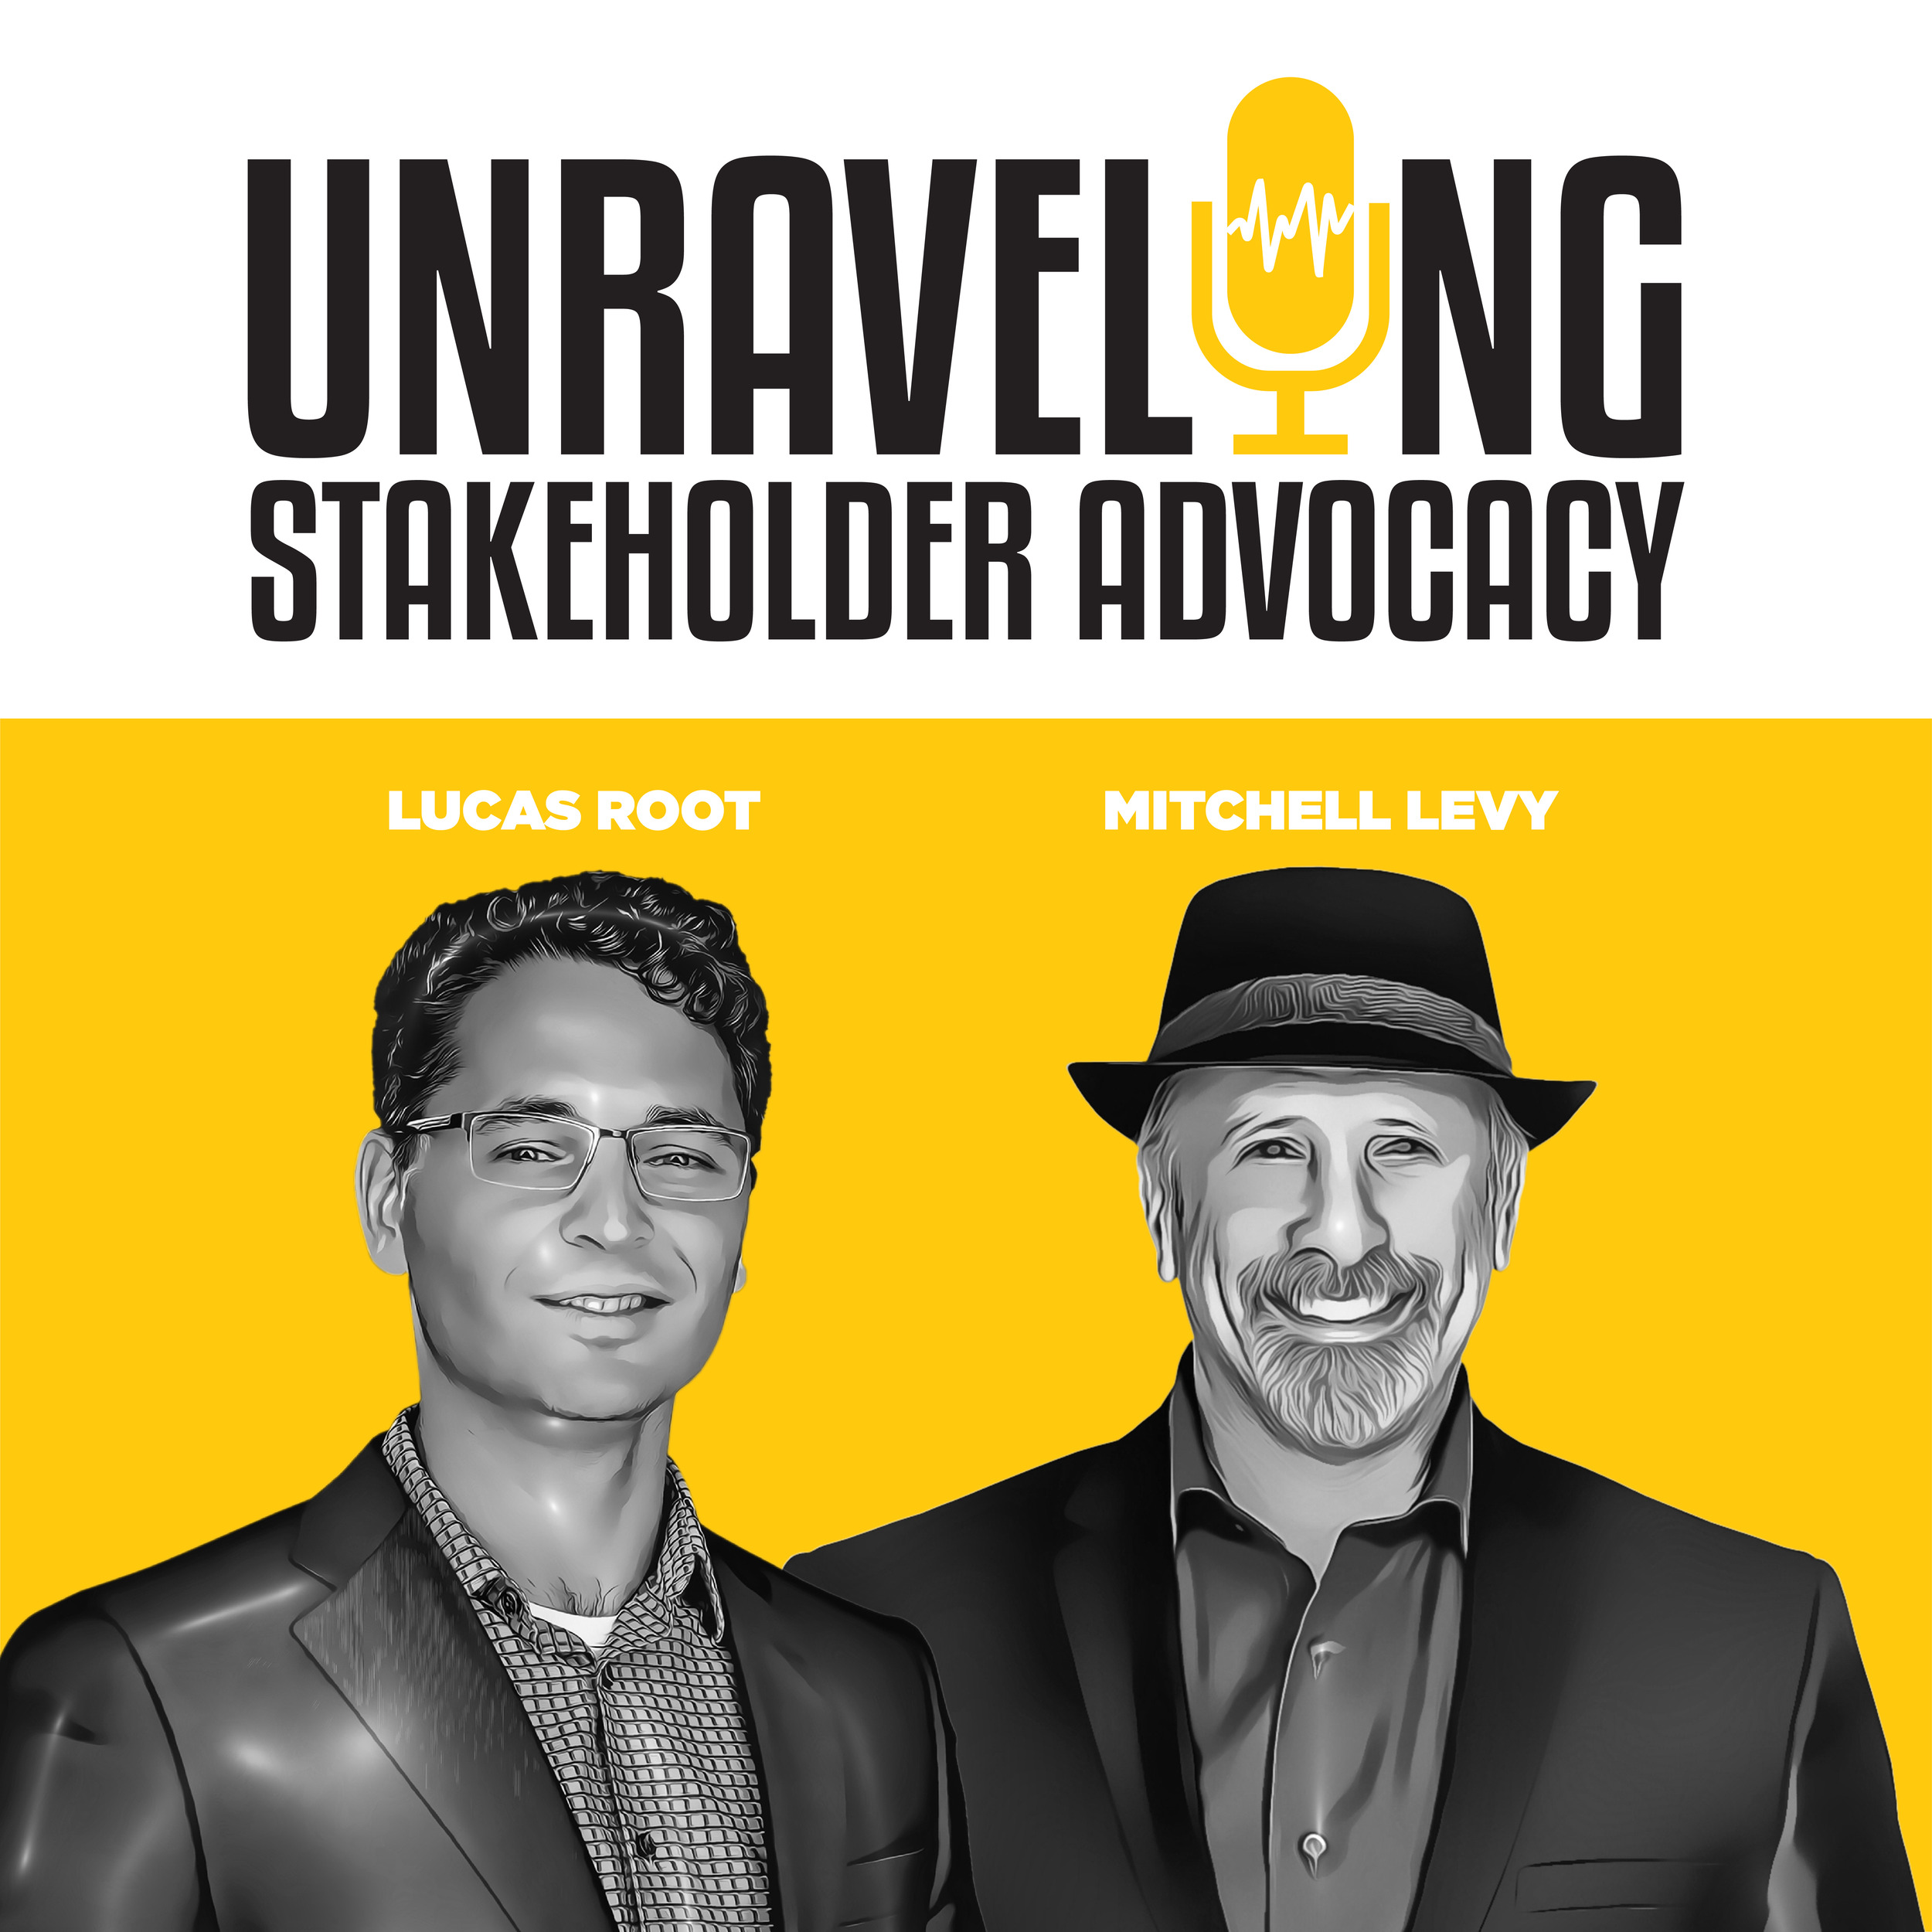 Artwork for podcast Unraveling Stakeholder Advocacy